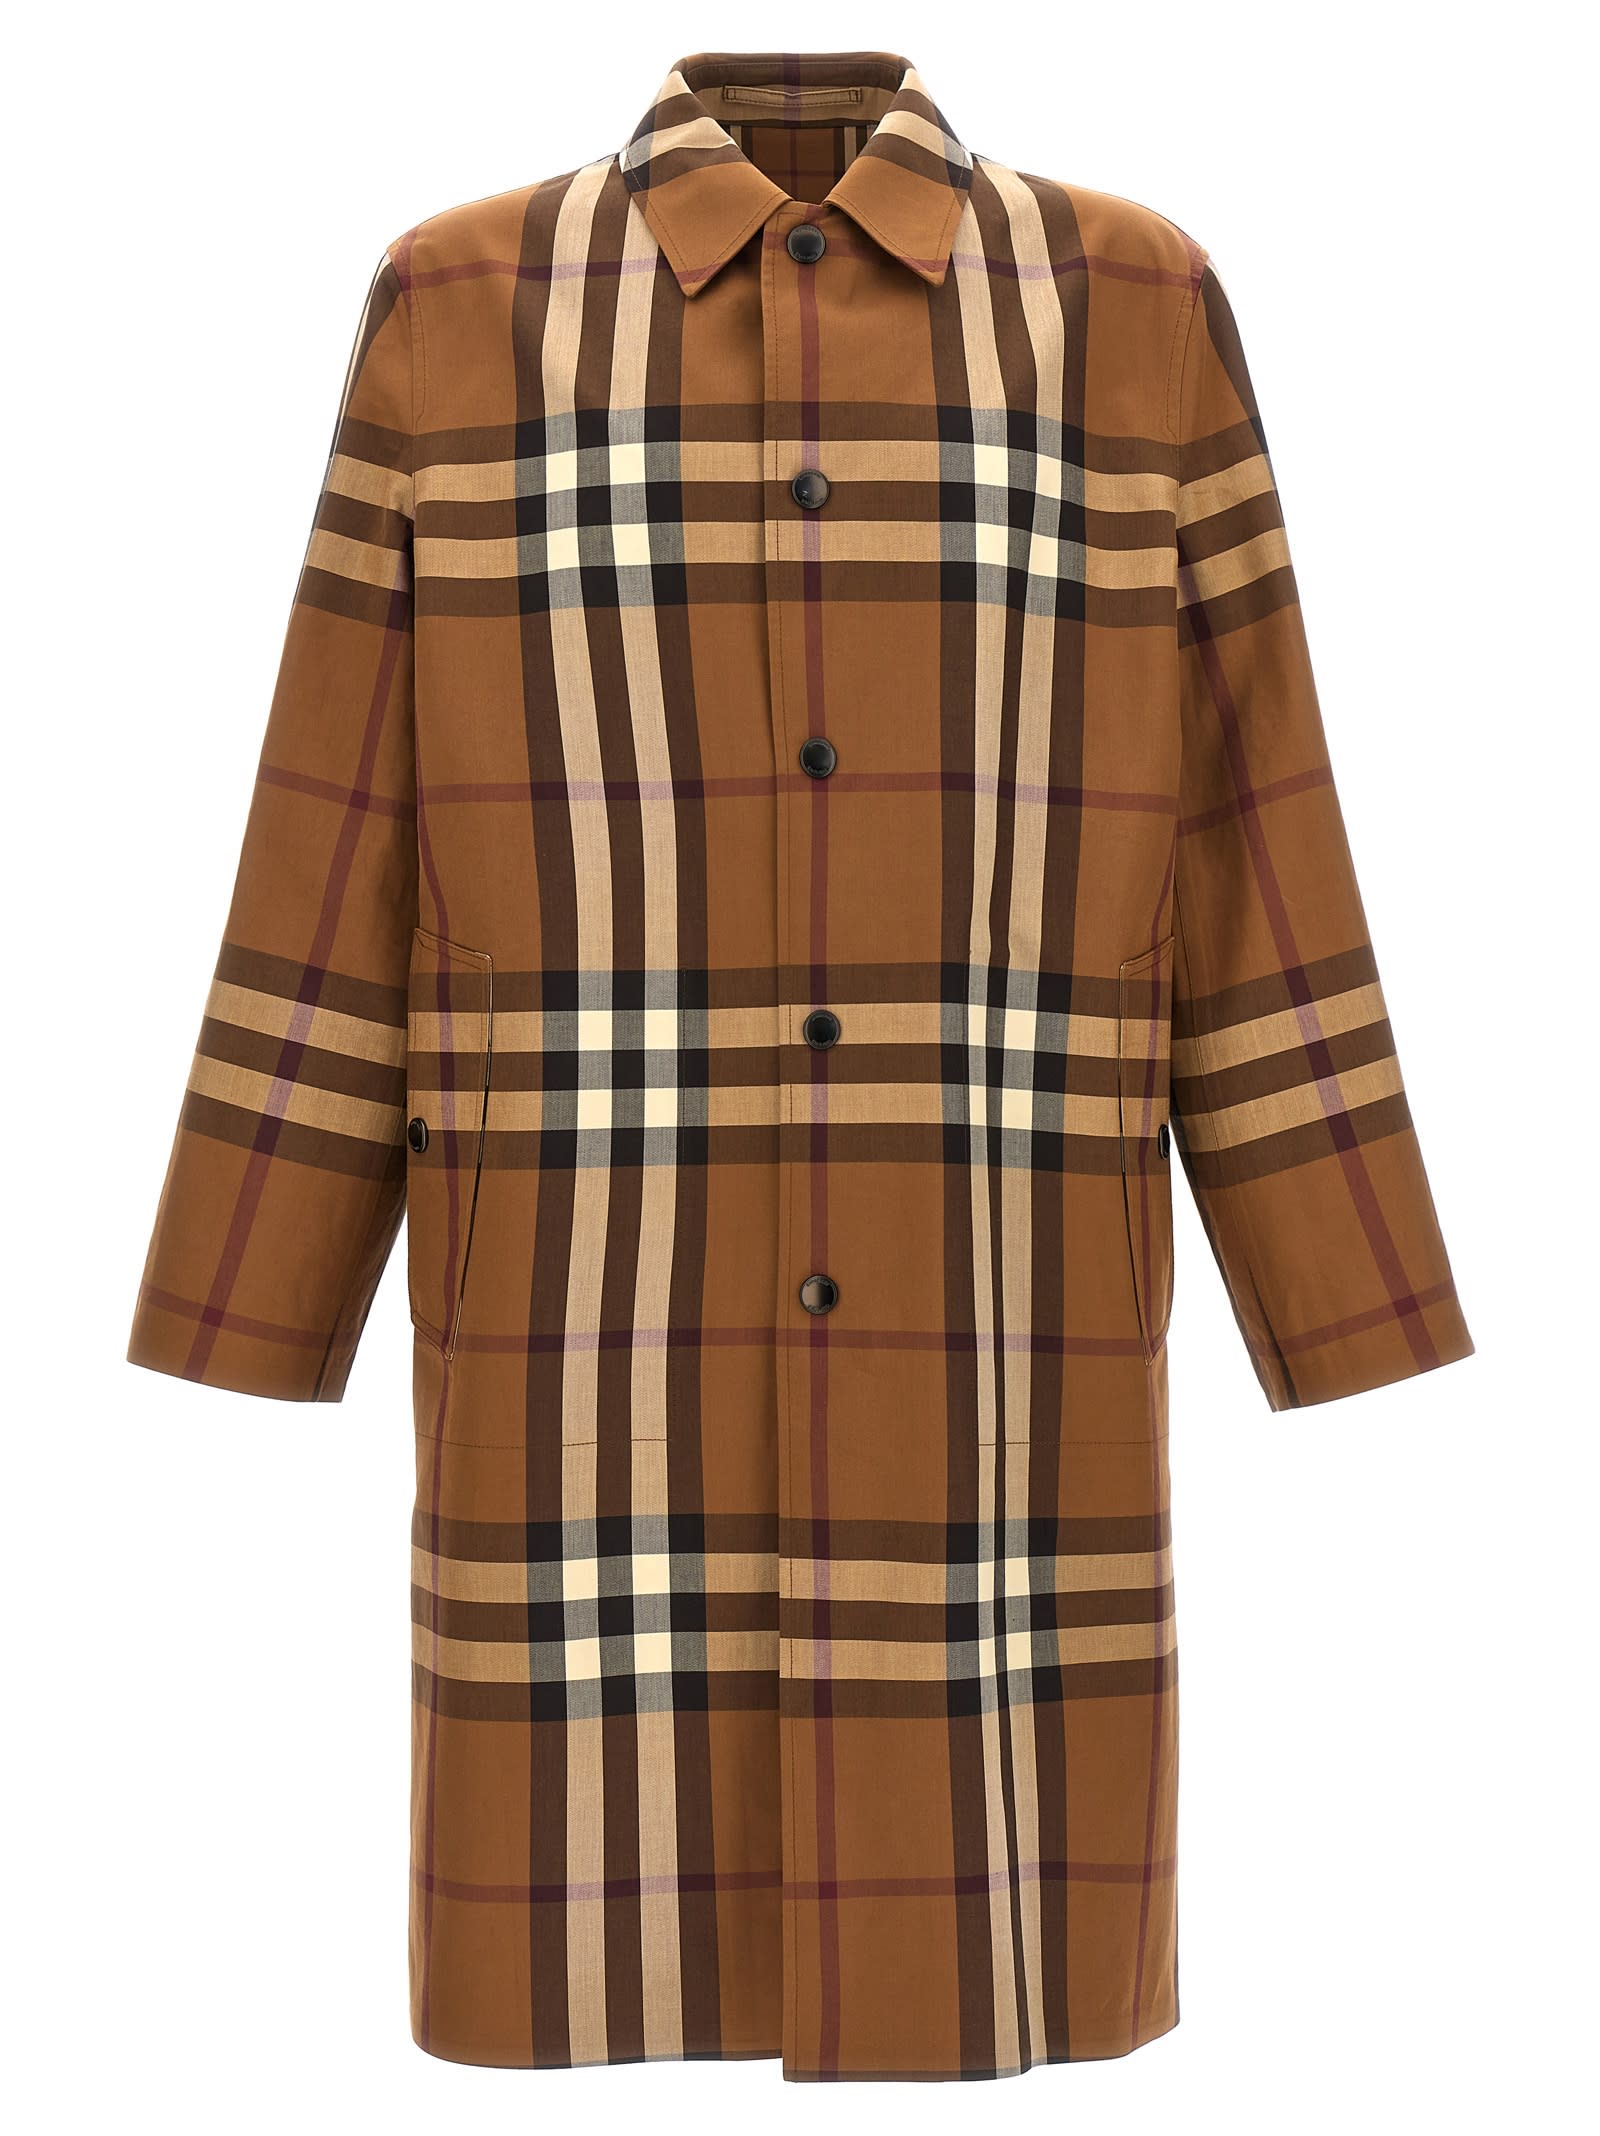 BURBERRY ABBEYSTEAD TRENCH COAT